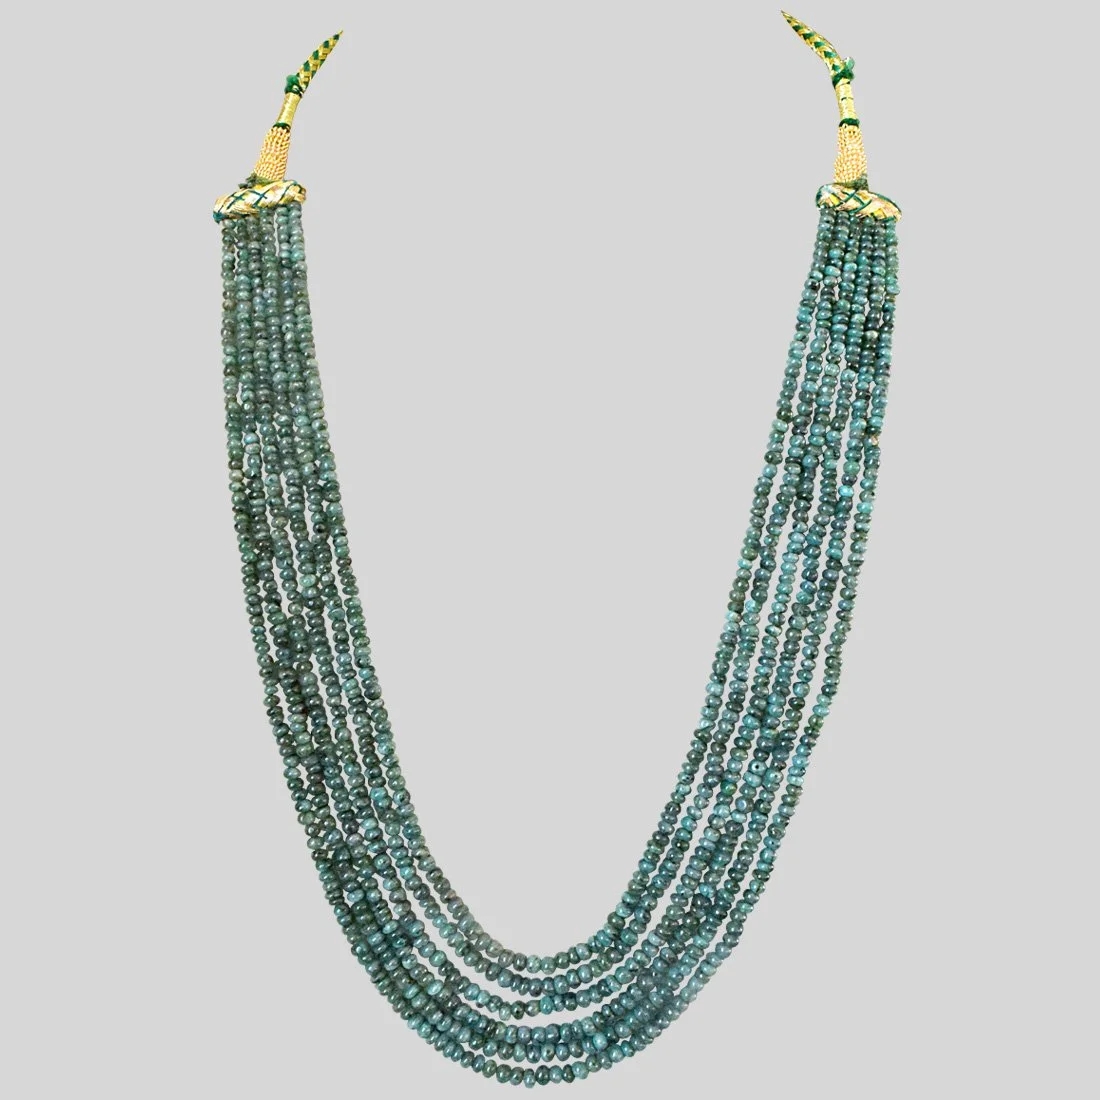 6 Line 290cts REAL Natural Green Emerald Beads Necklace for Women (290cts EMR Neck)